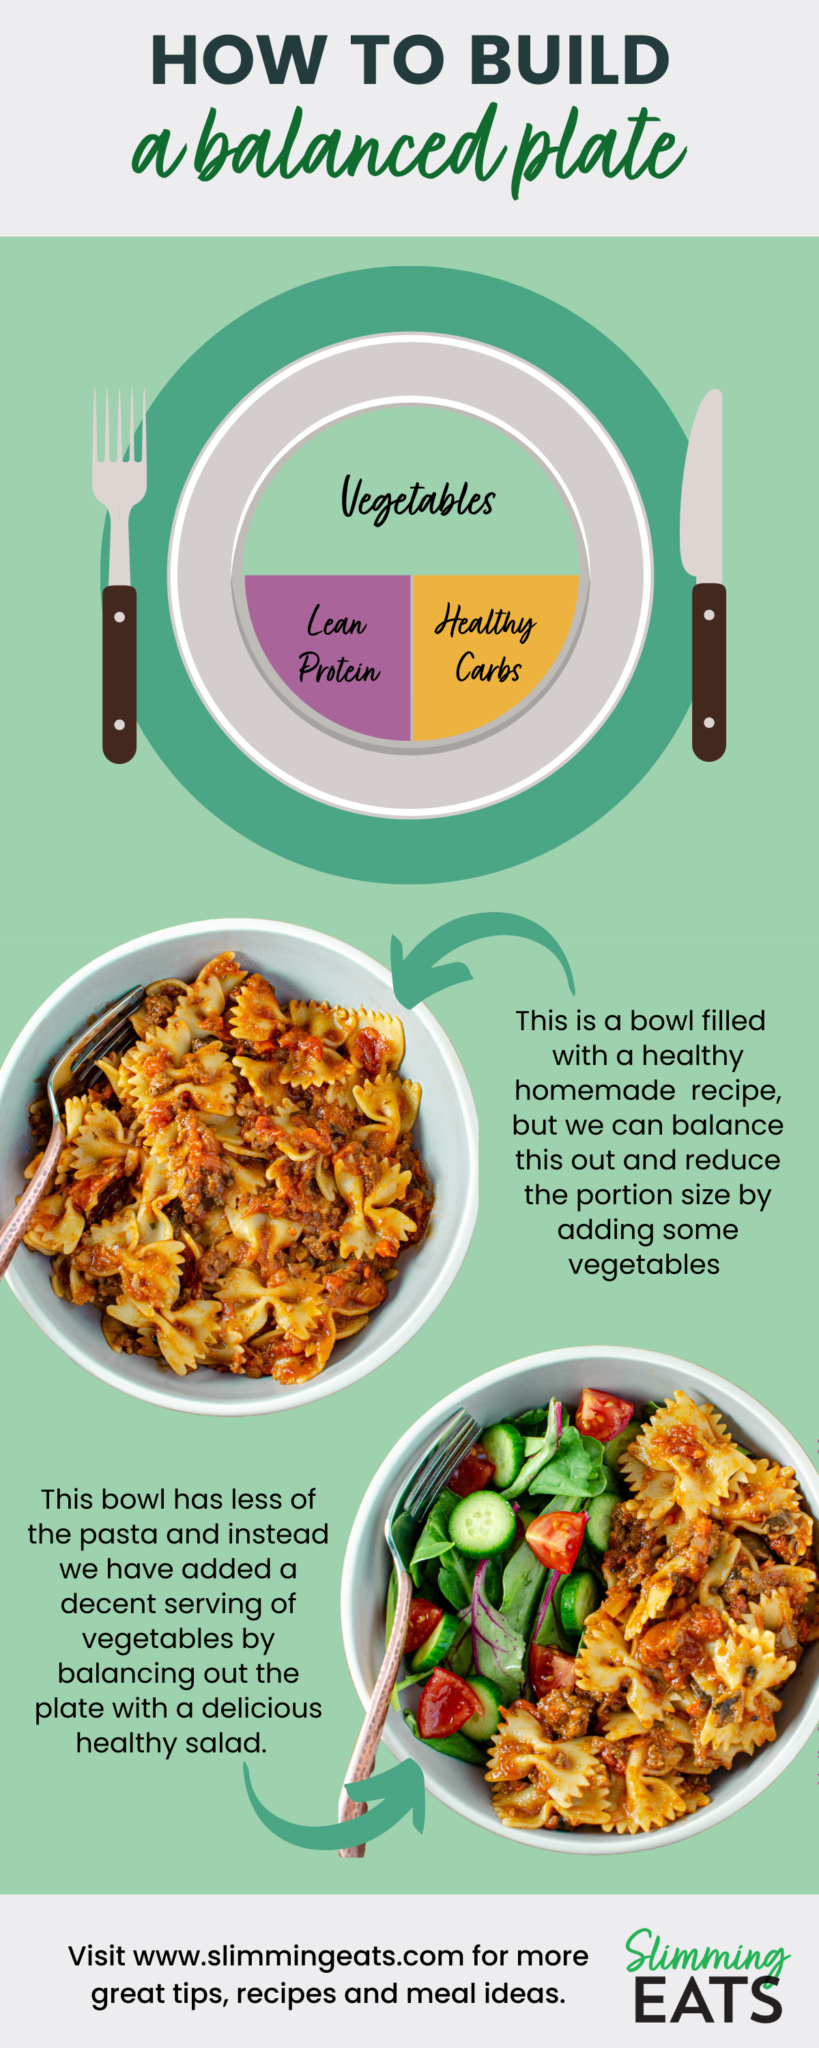 info graphic for plate portion control 